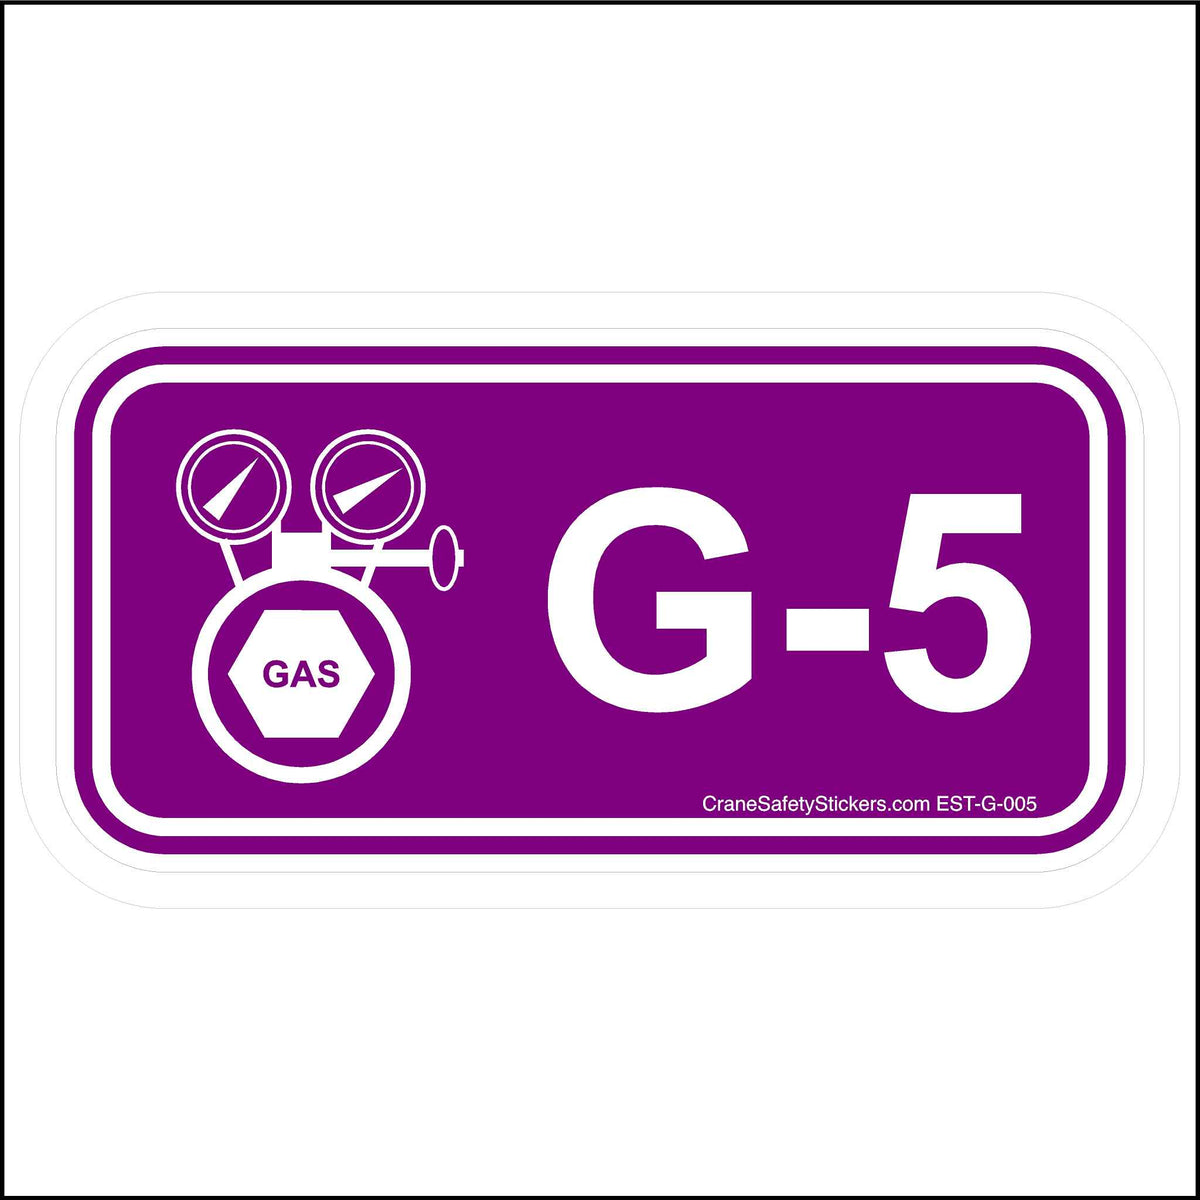 Energy Control Program Gas Disconnect Stickers G-5.